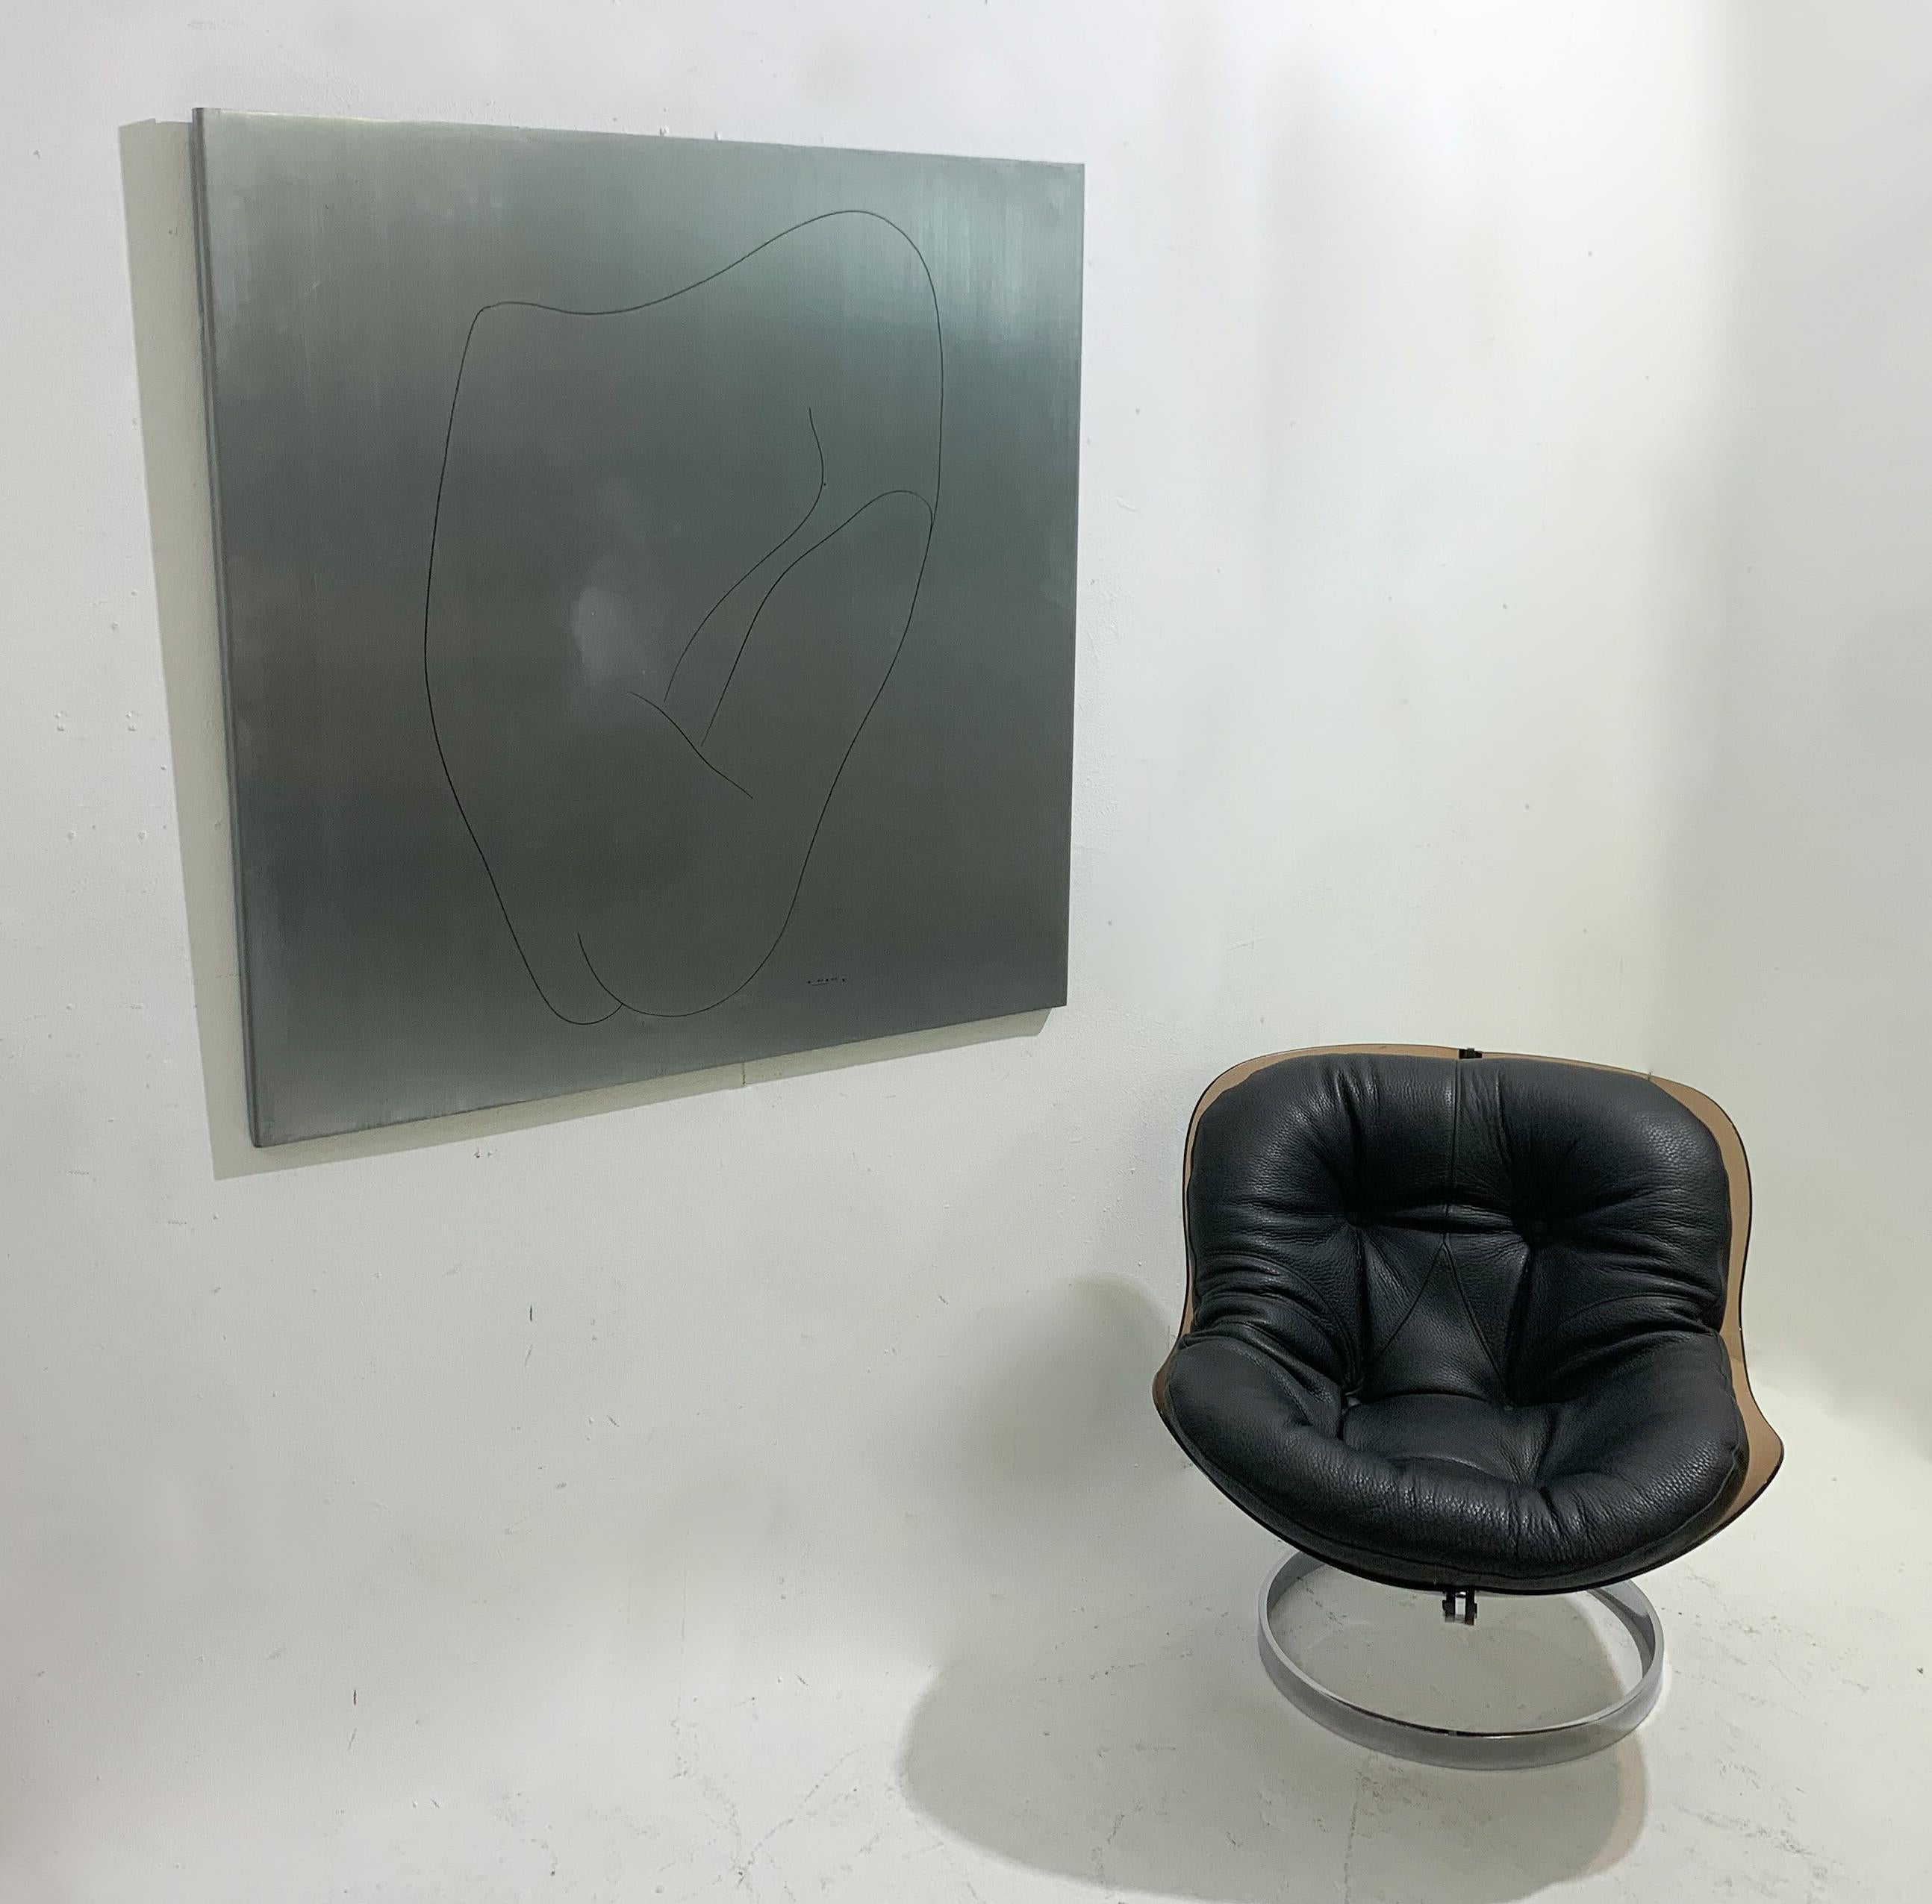 Mid-Century Modern aluminium wall panel by Alberto Viani, 1971 - signed and numbered (limited edition of 200).